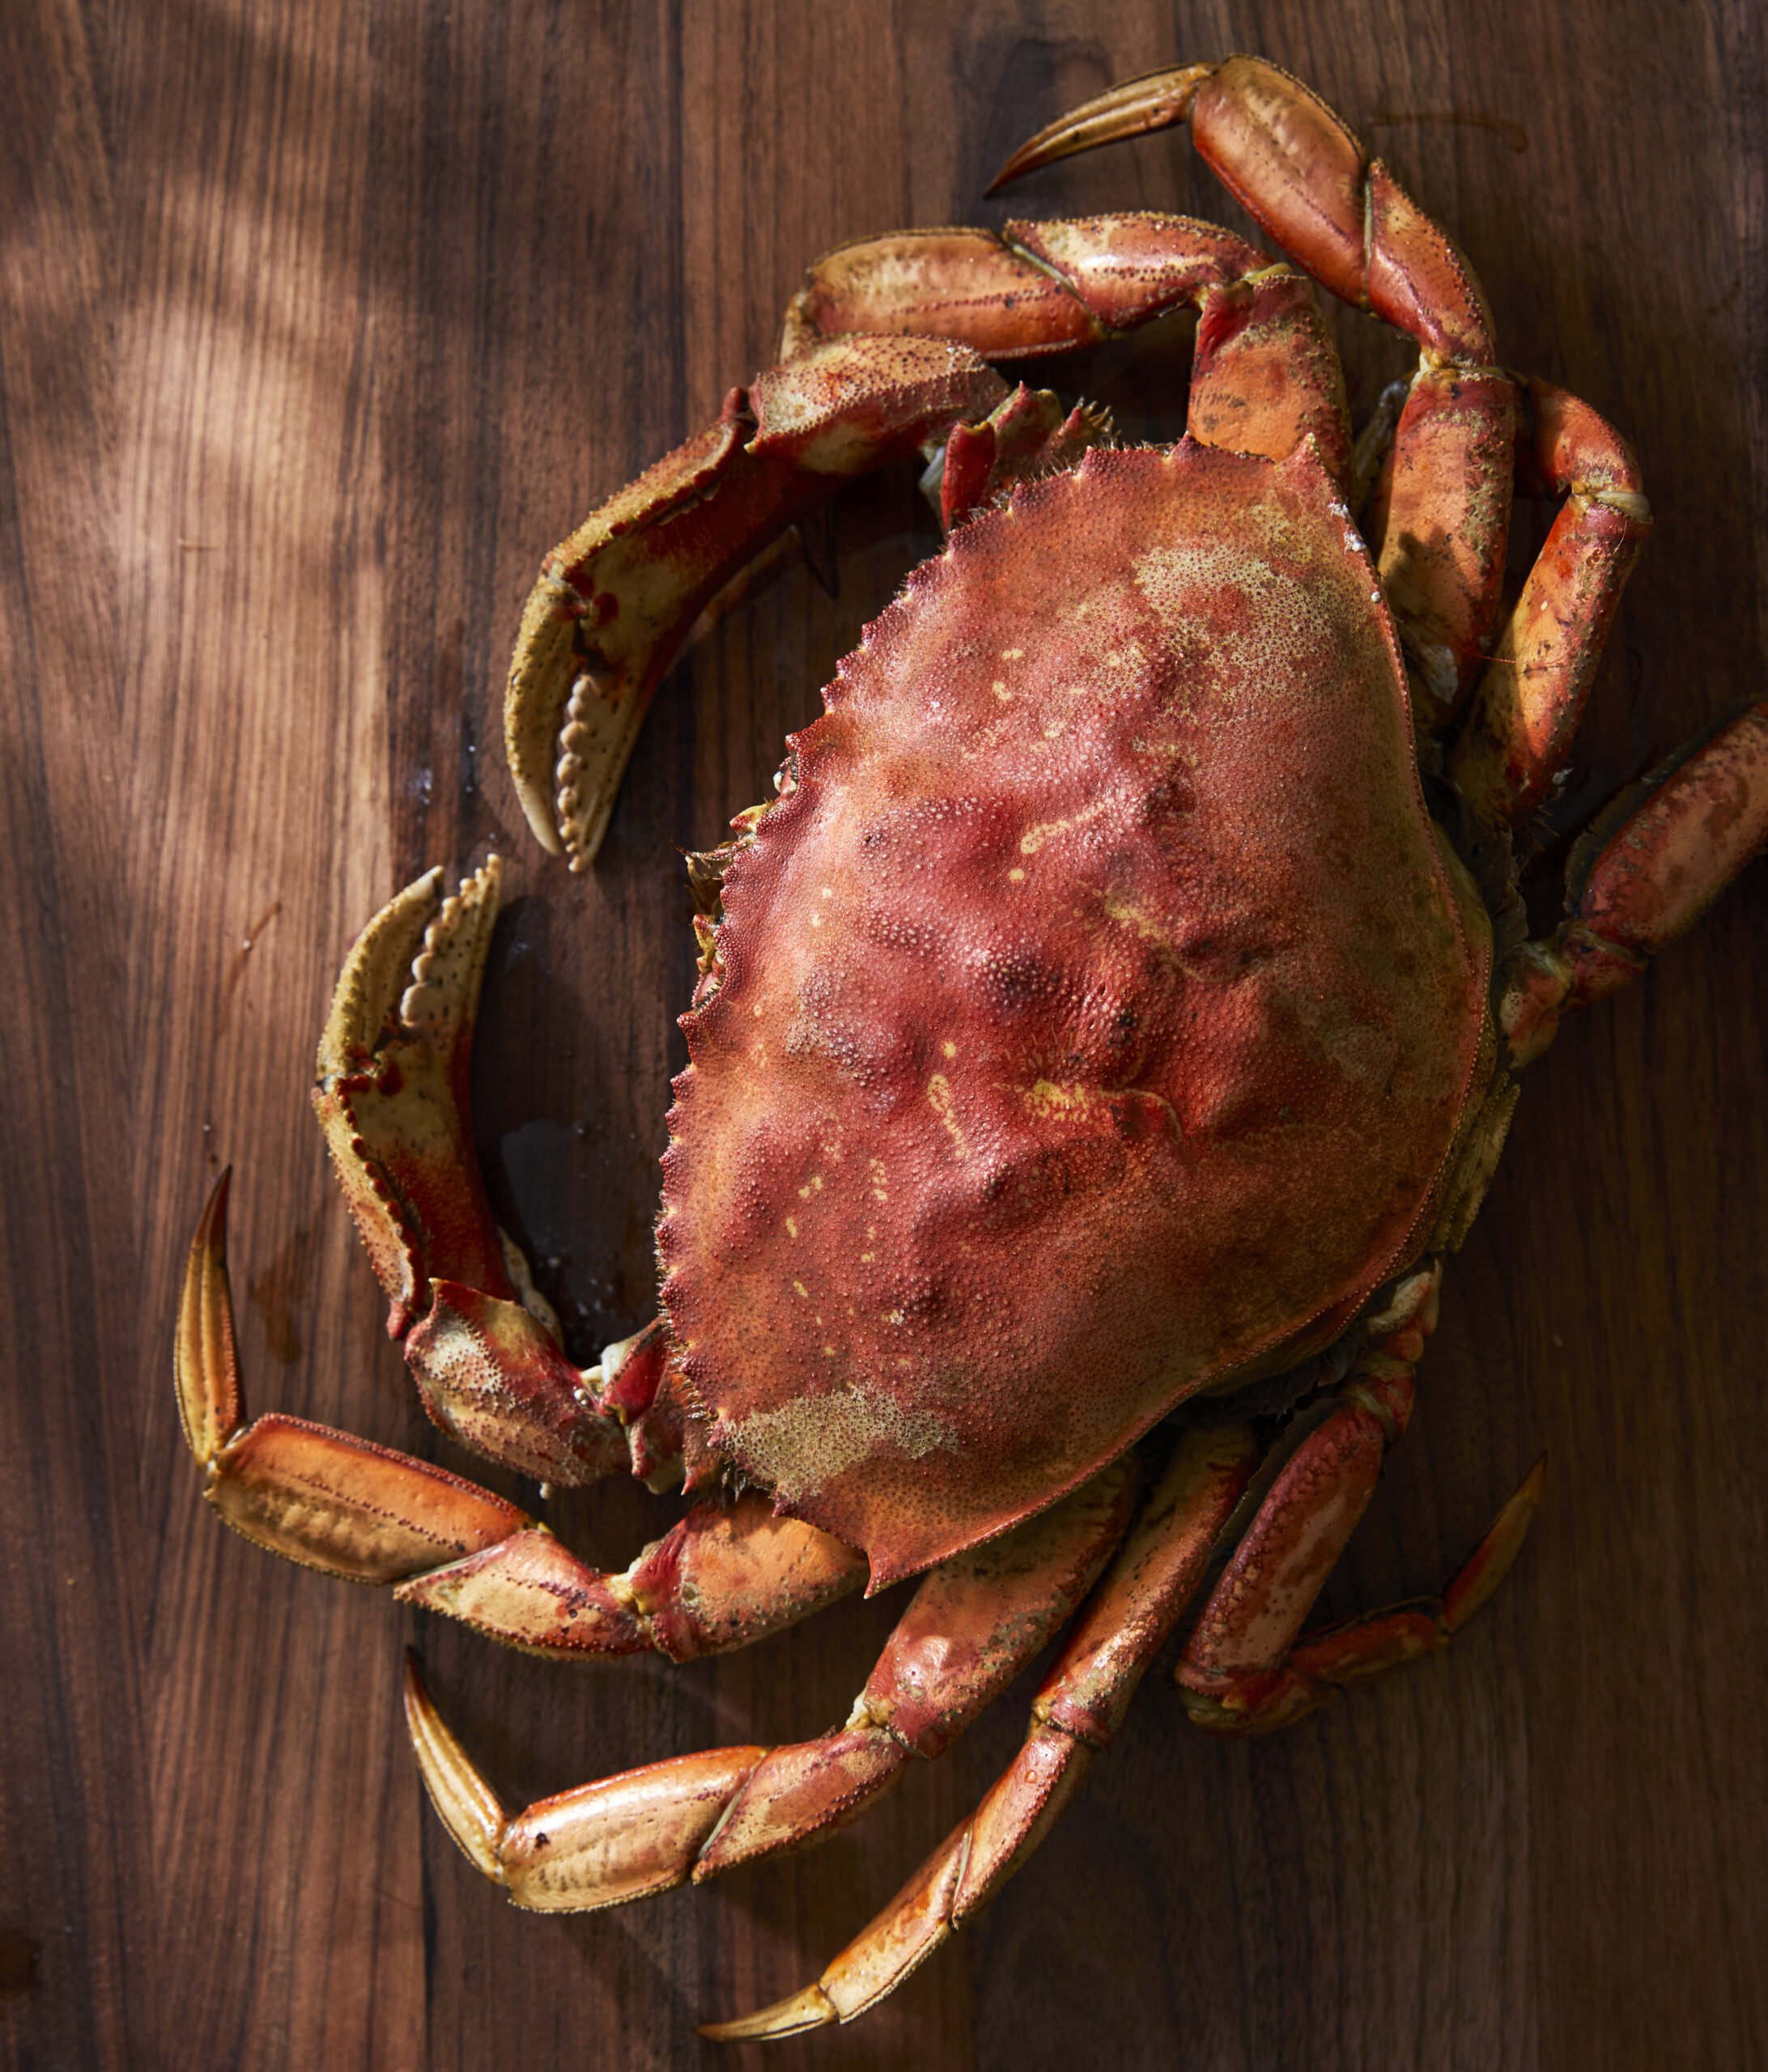 Dungeness Crab in Genuine Skagit Cooking